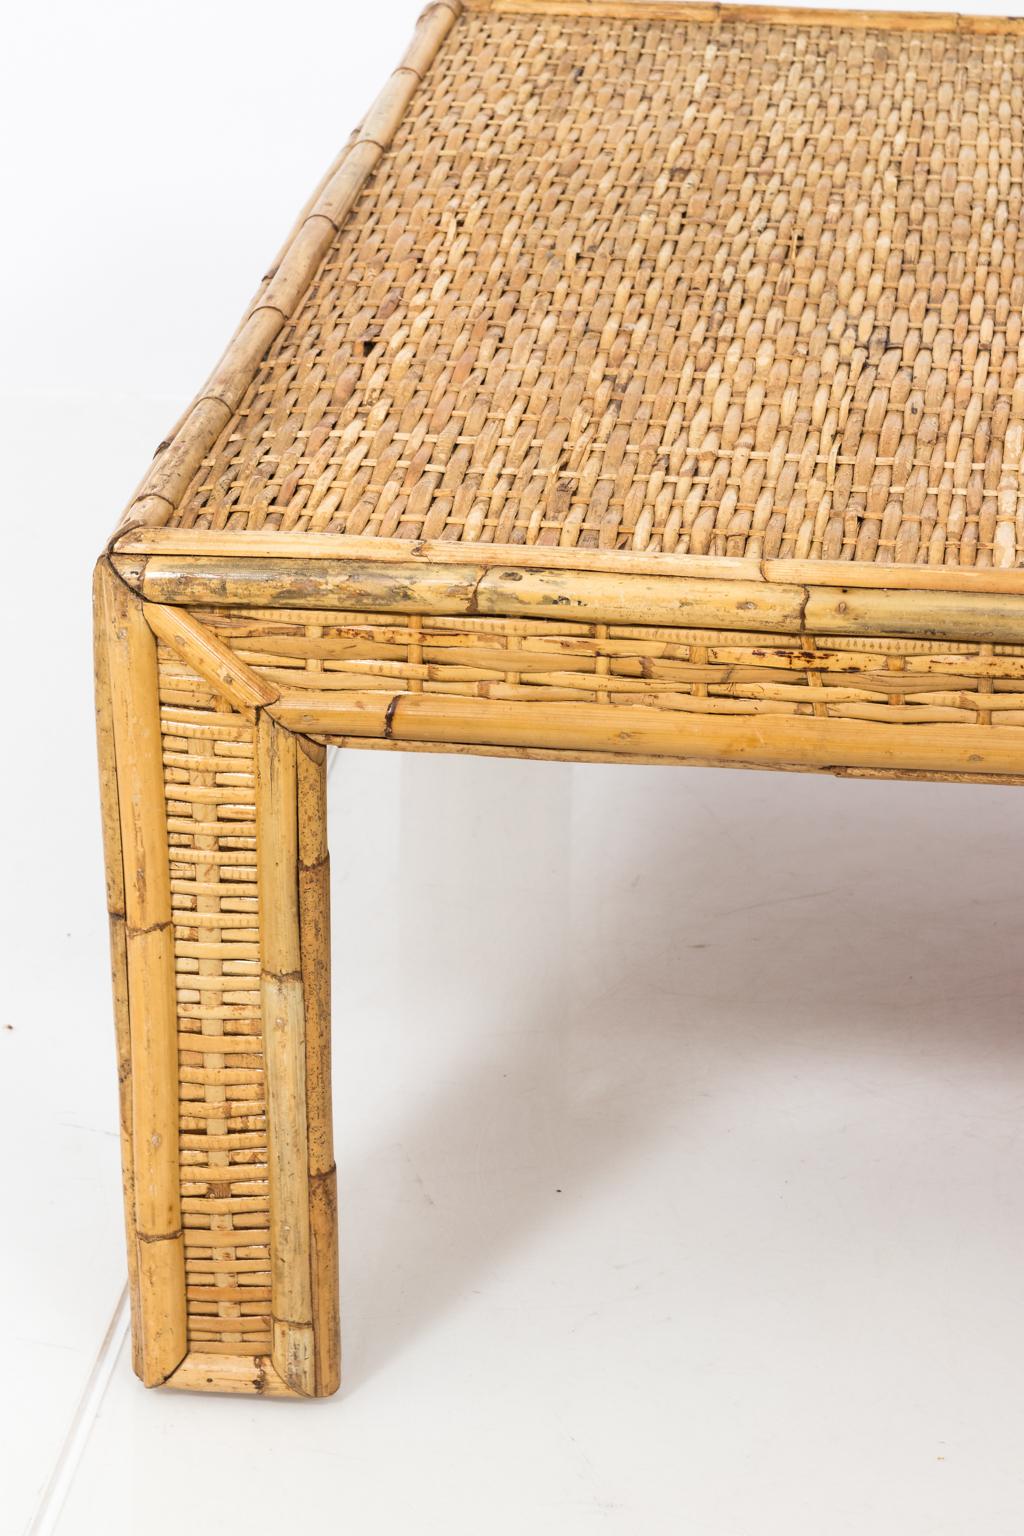 Square woven rattan coffee table wrapped around a solid wood frame, circa mid-20th century.
 